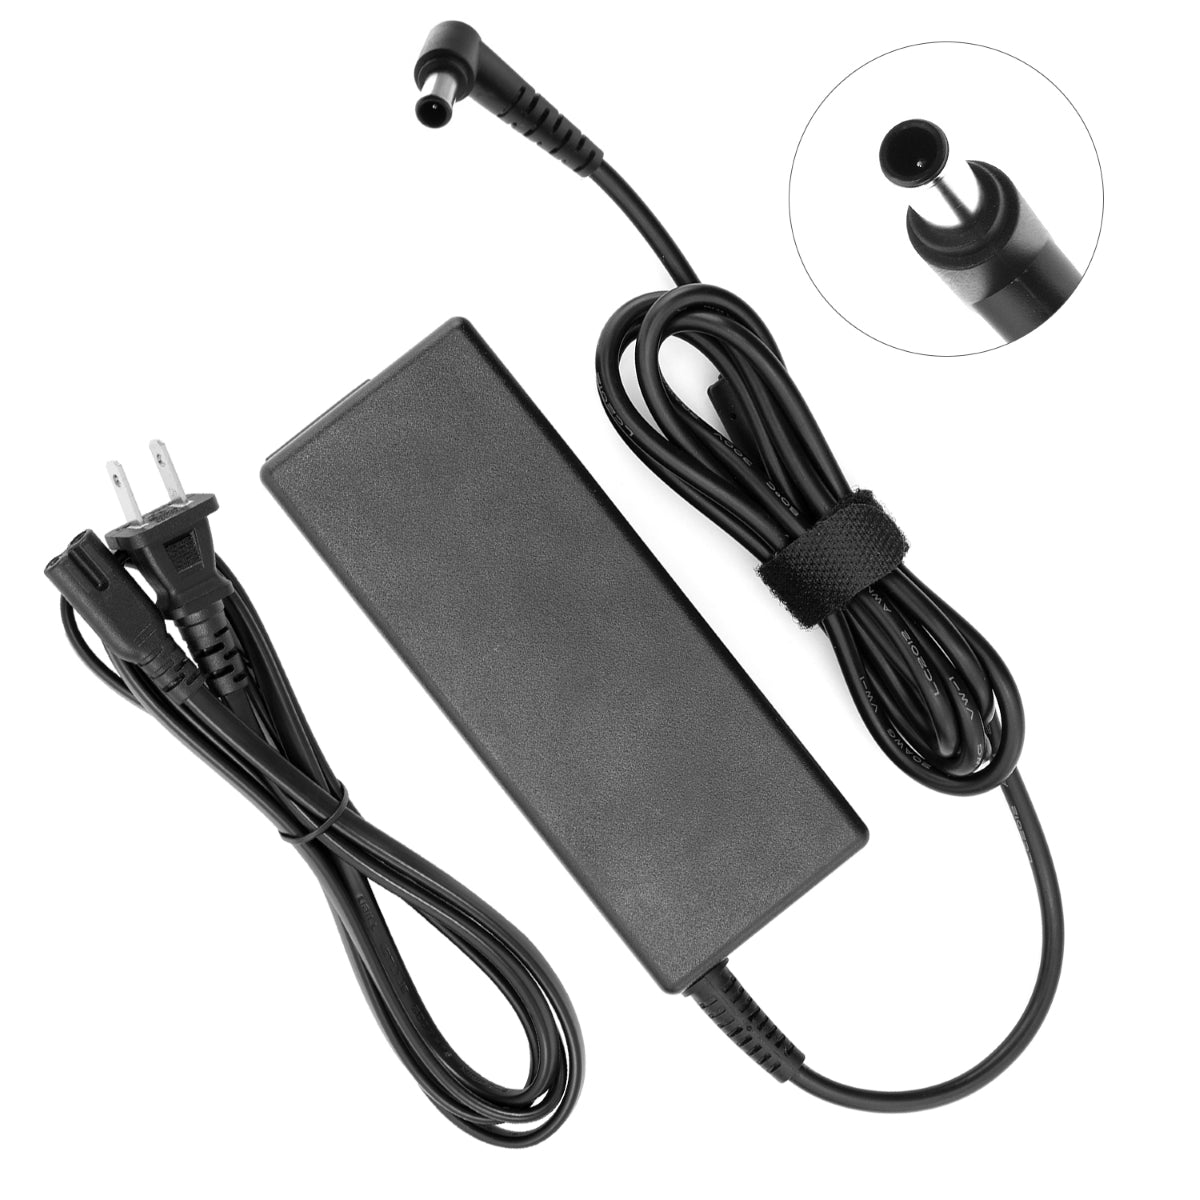 AC Adapter for LG 23EN33S-B Monitor